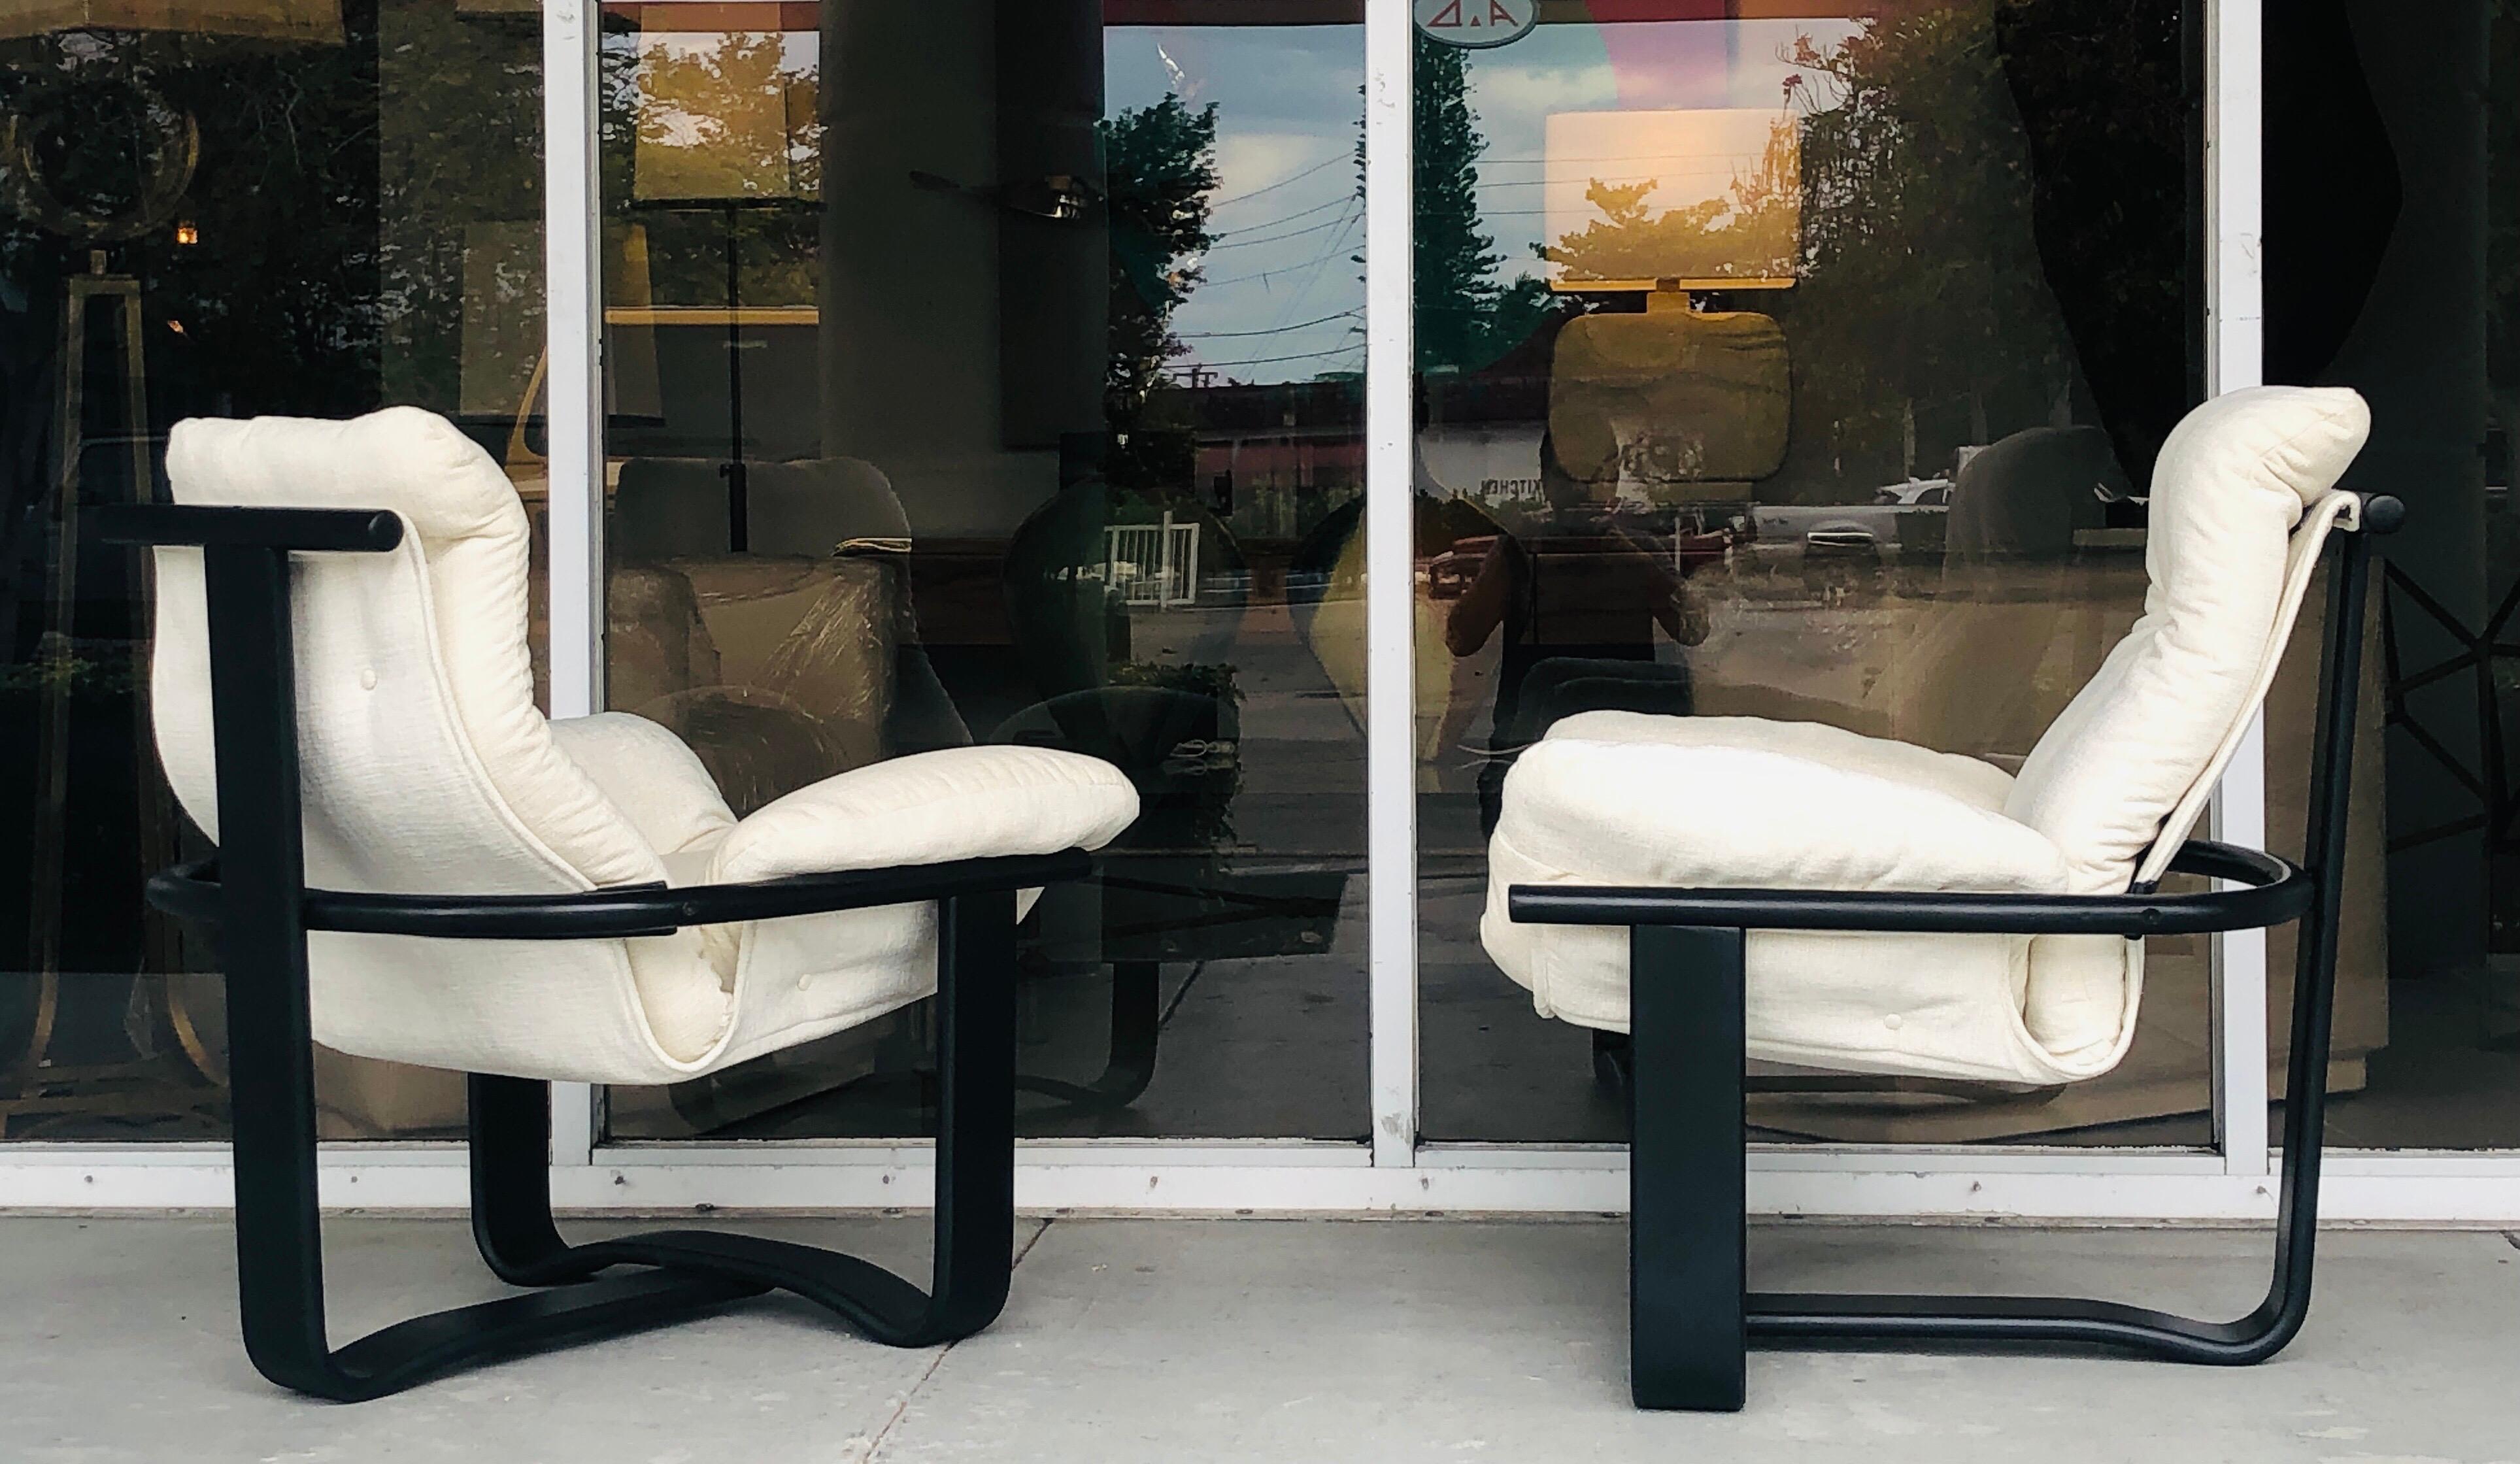 A great pair of chairs. Black enameled wood frame, from which the seats hang free. Beautiful modern design, clever and comfortable at once.